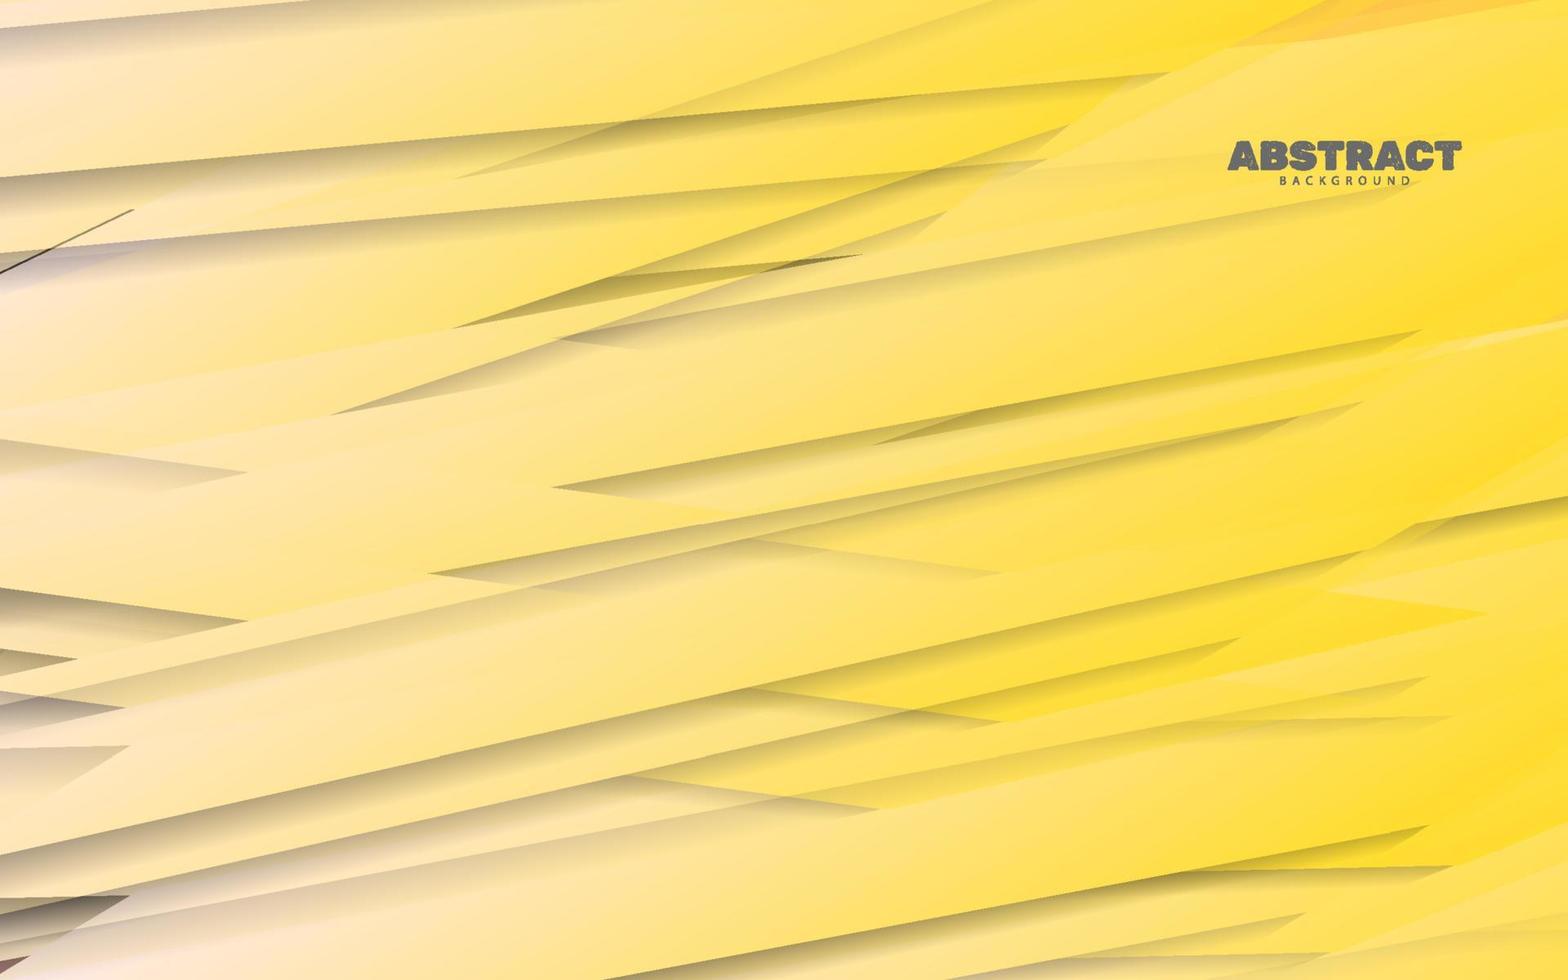 Abstract papercut yellow color background vector